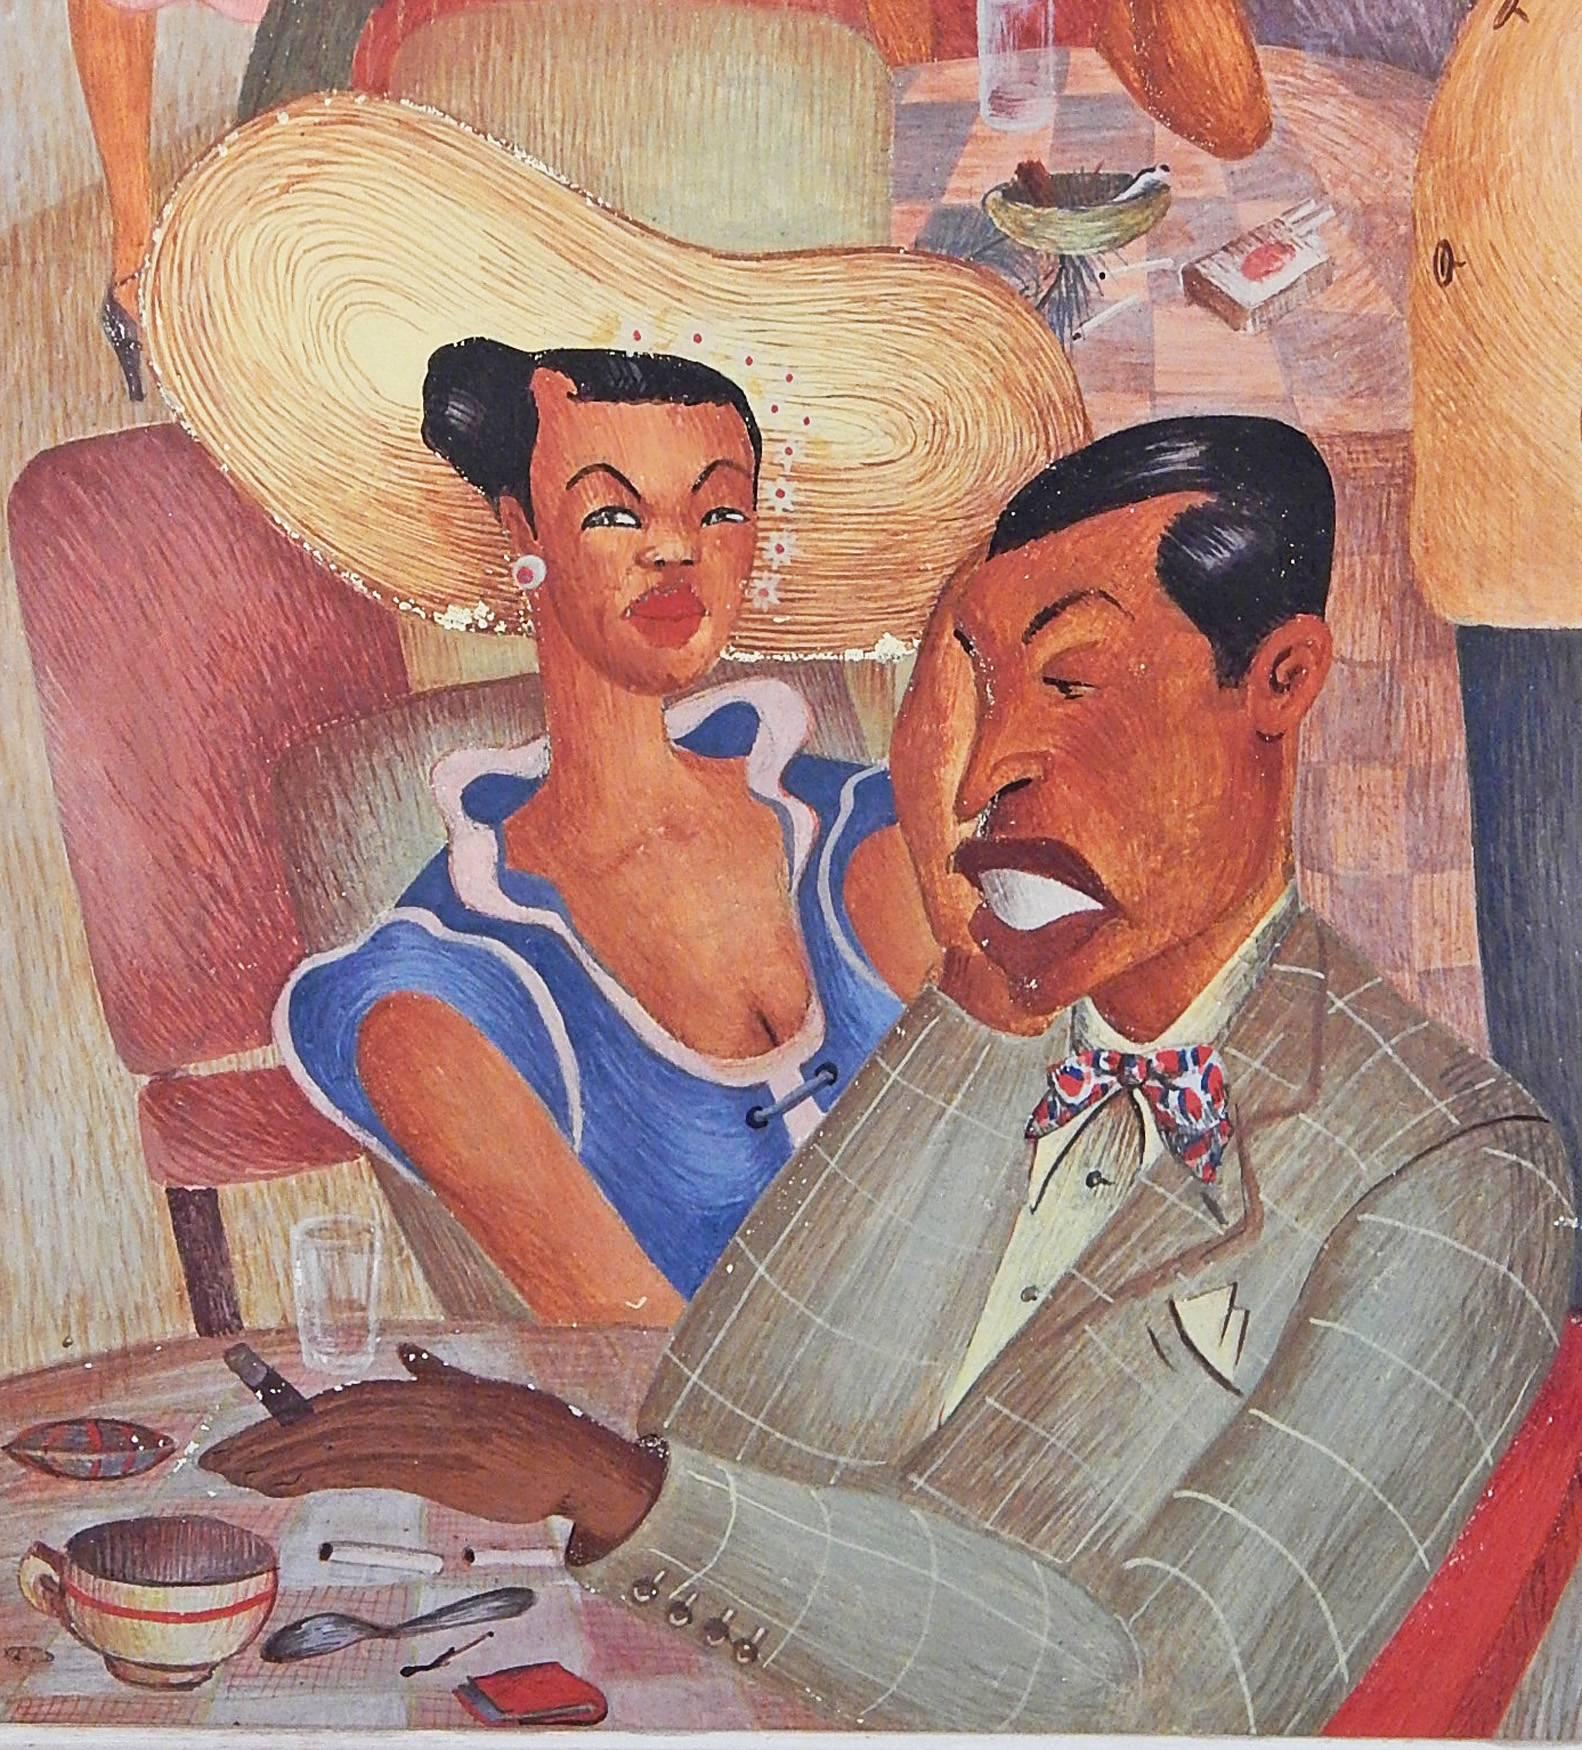 A brilliant and lively depiction of a crowded cafe scene in 1945, this painting by Adalie Margules Brent depicts a slice of Black America at the end of World War II, probably in New Orleans, complete with a waiter, fashionably dressed men and women